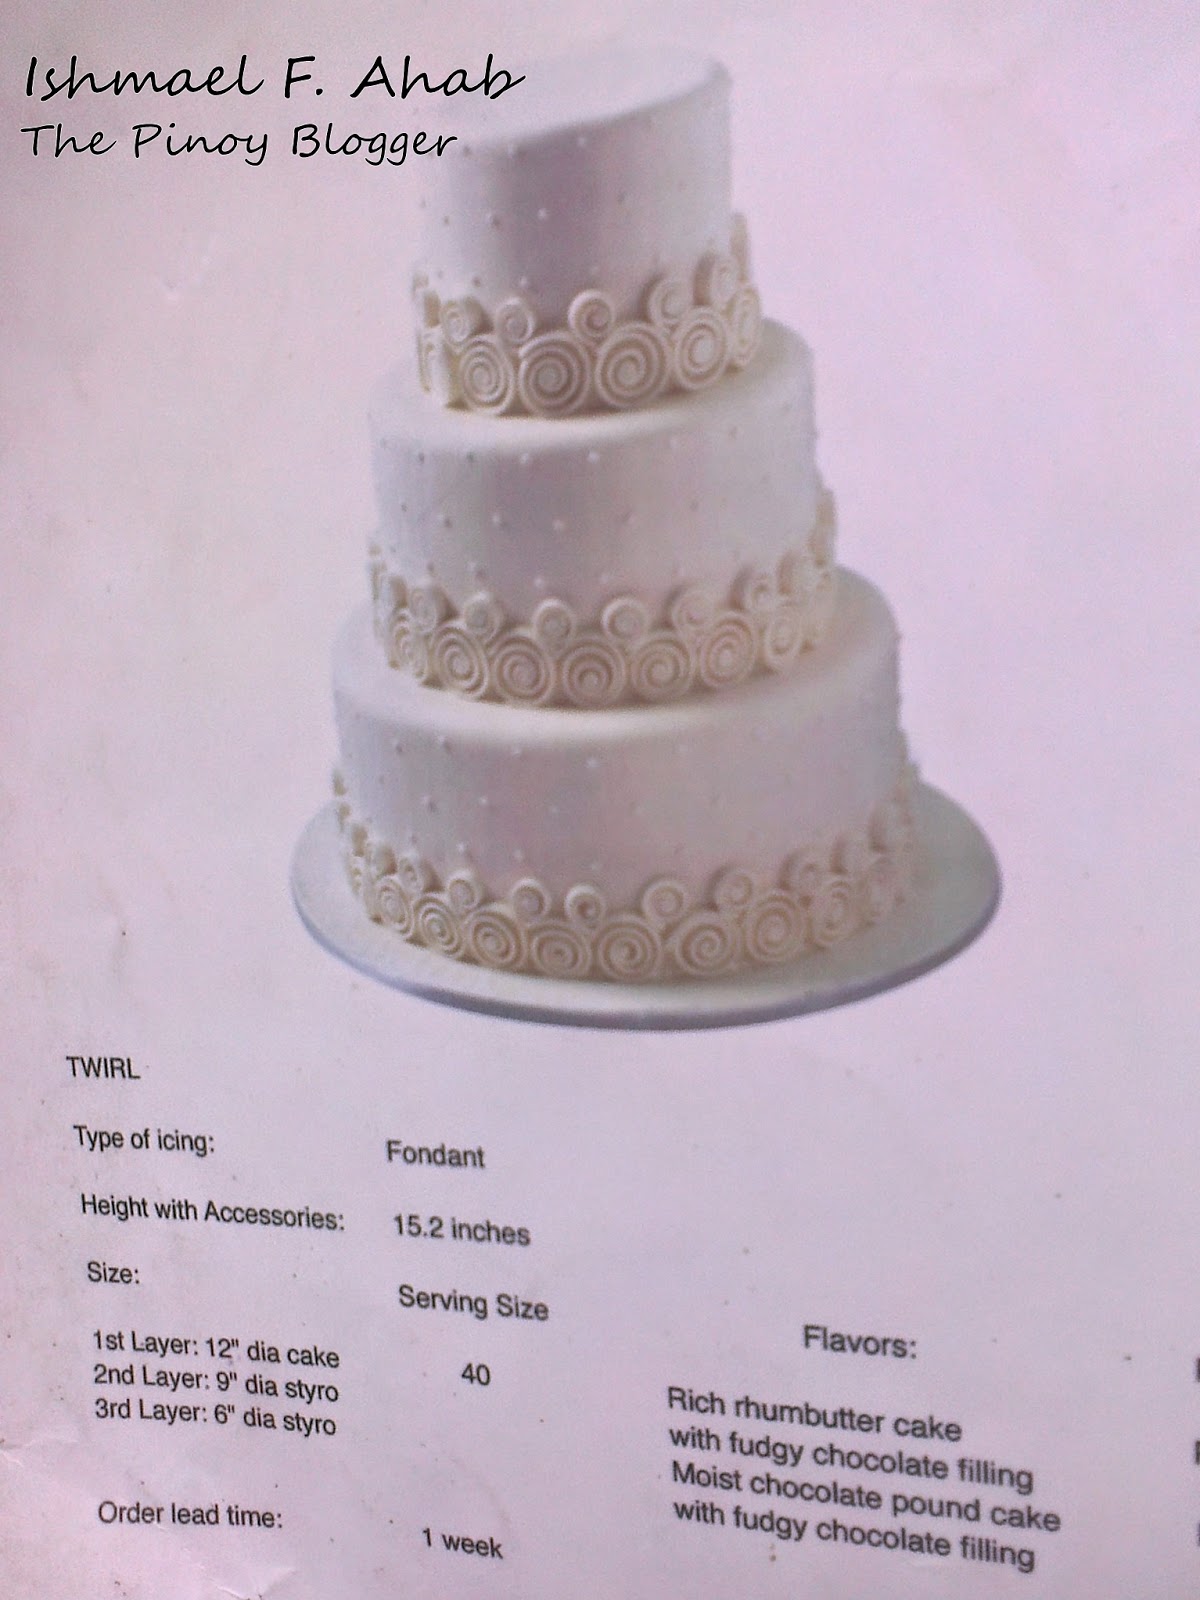 Affordable wedding cakes philippines